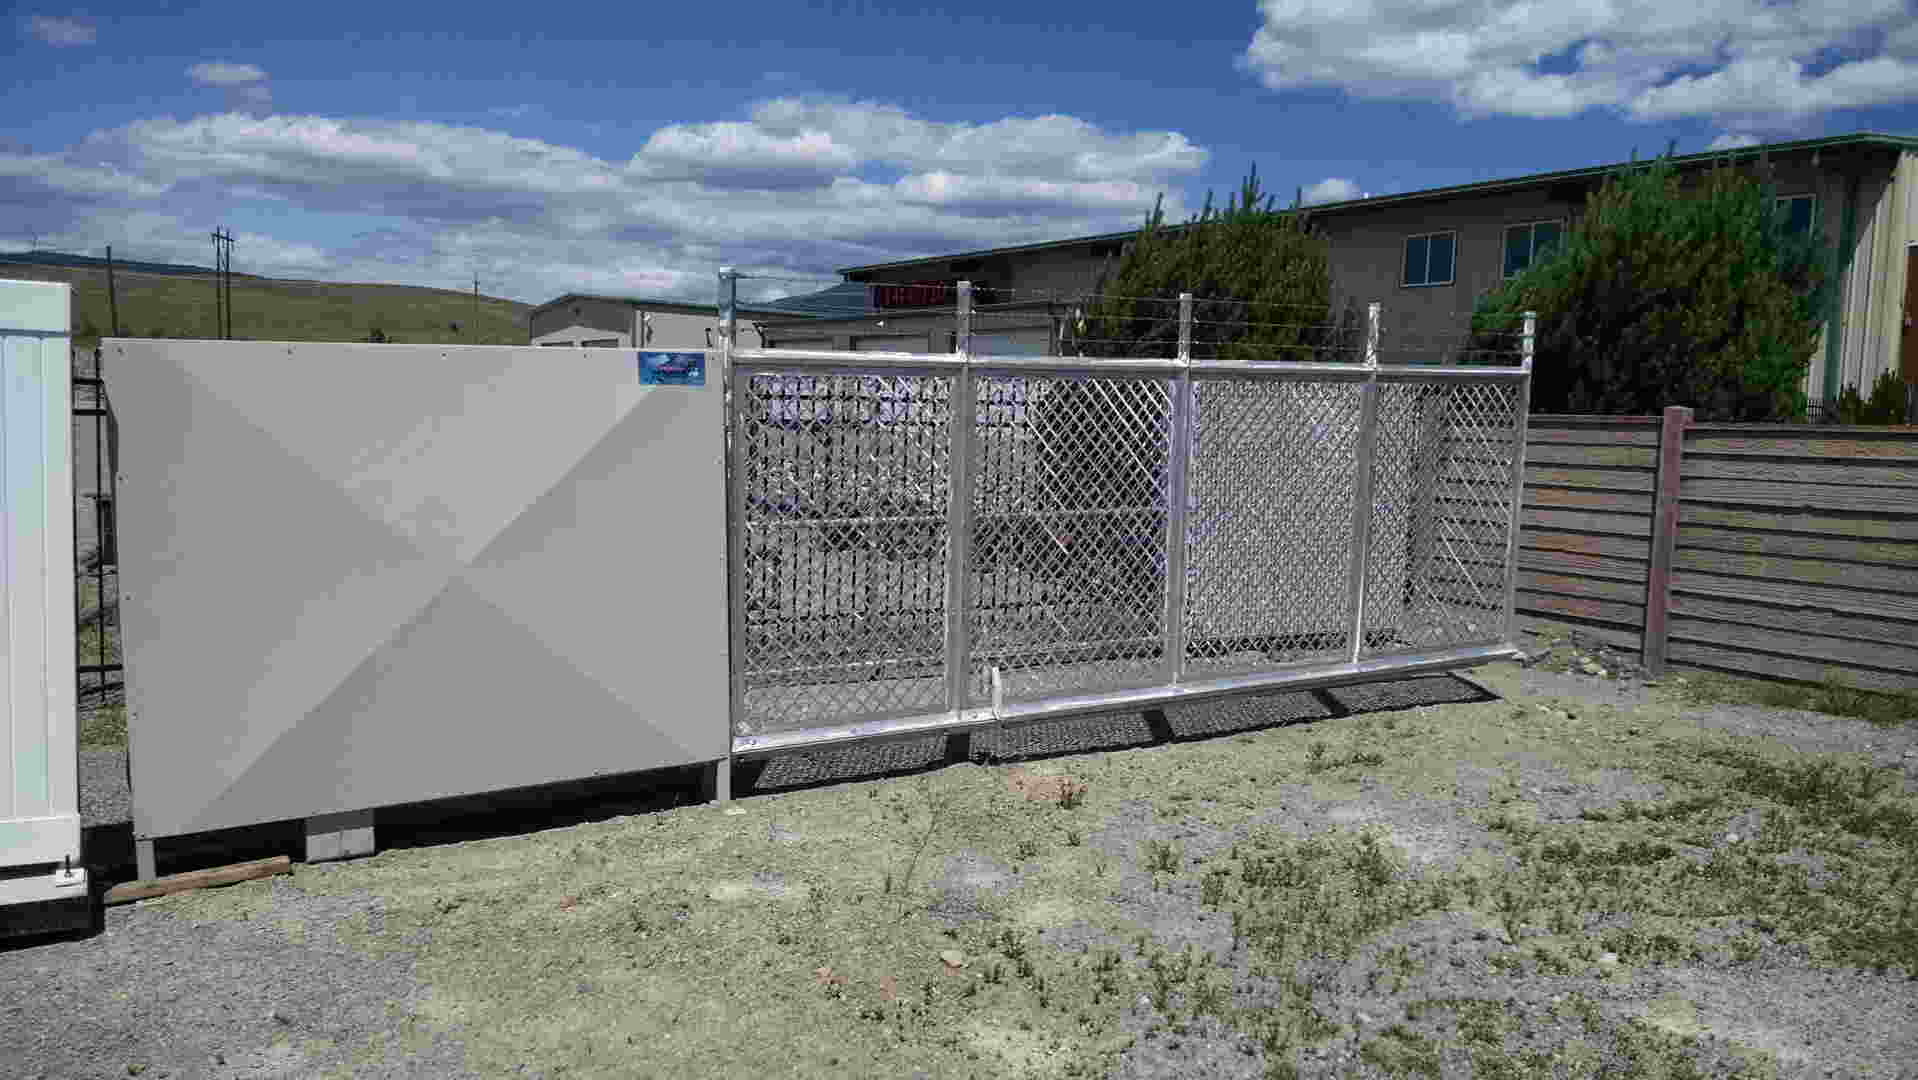 Automatic Gate - Grizzly Fence in Missoula, MT